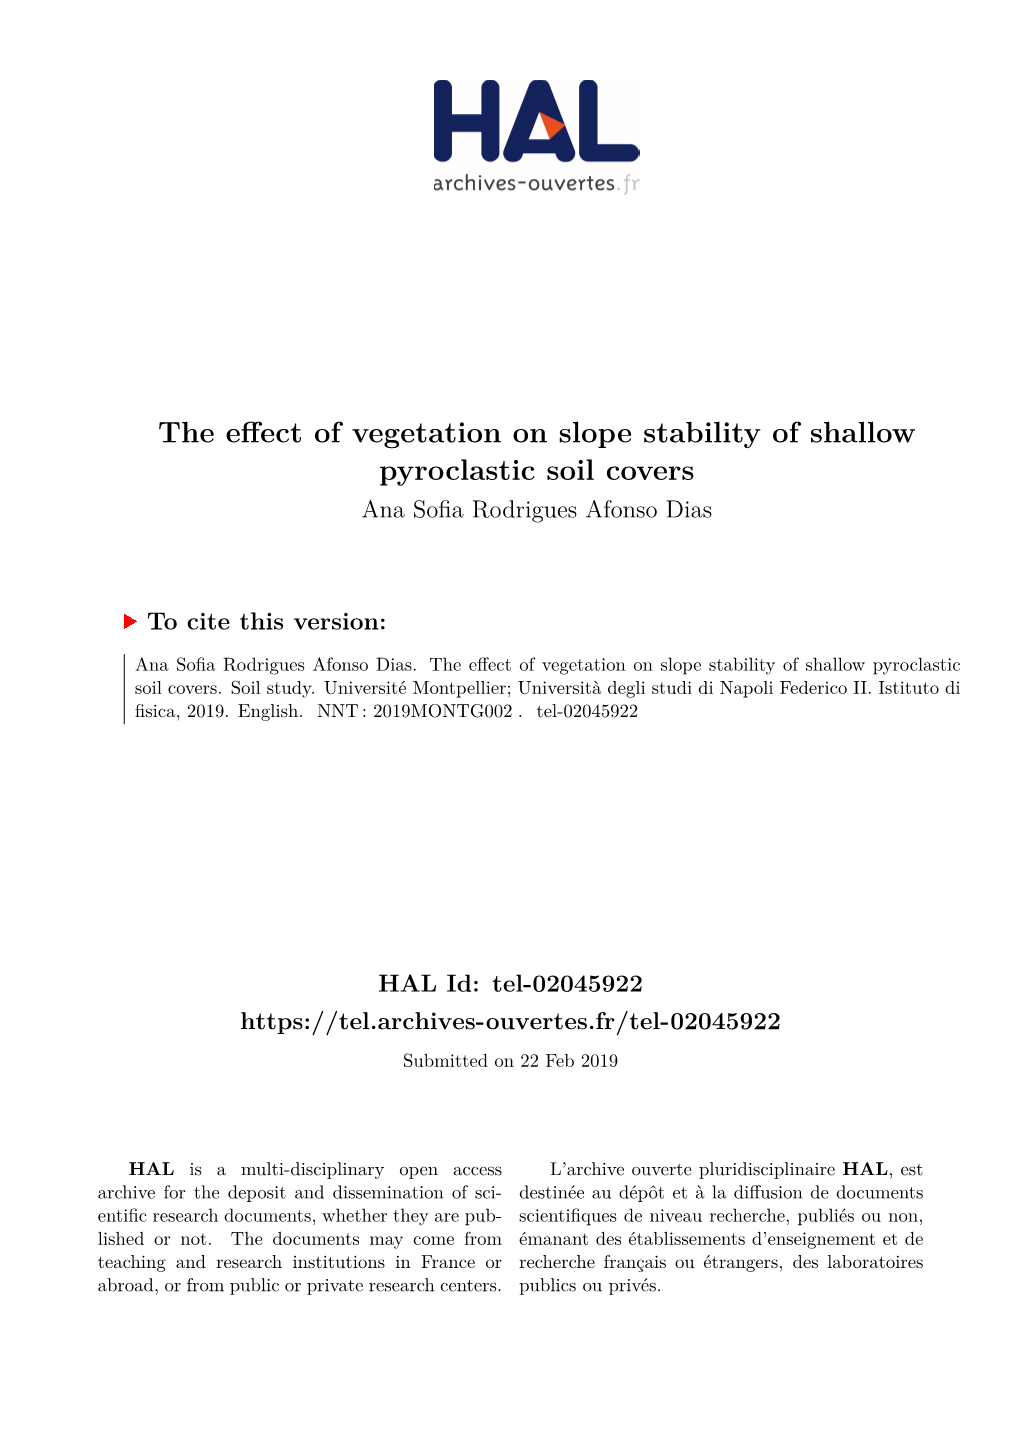 The Effect of Vegetation on Slope Stability of Shallow Pyroclastic Soil Covers Ana Sofia Rodrigues Afonso Dias